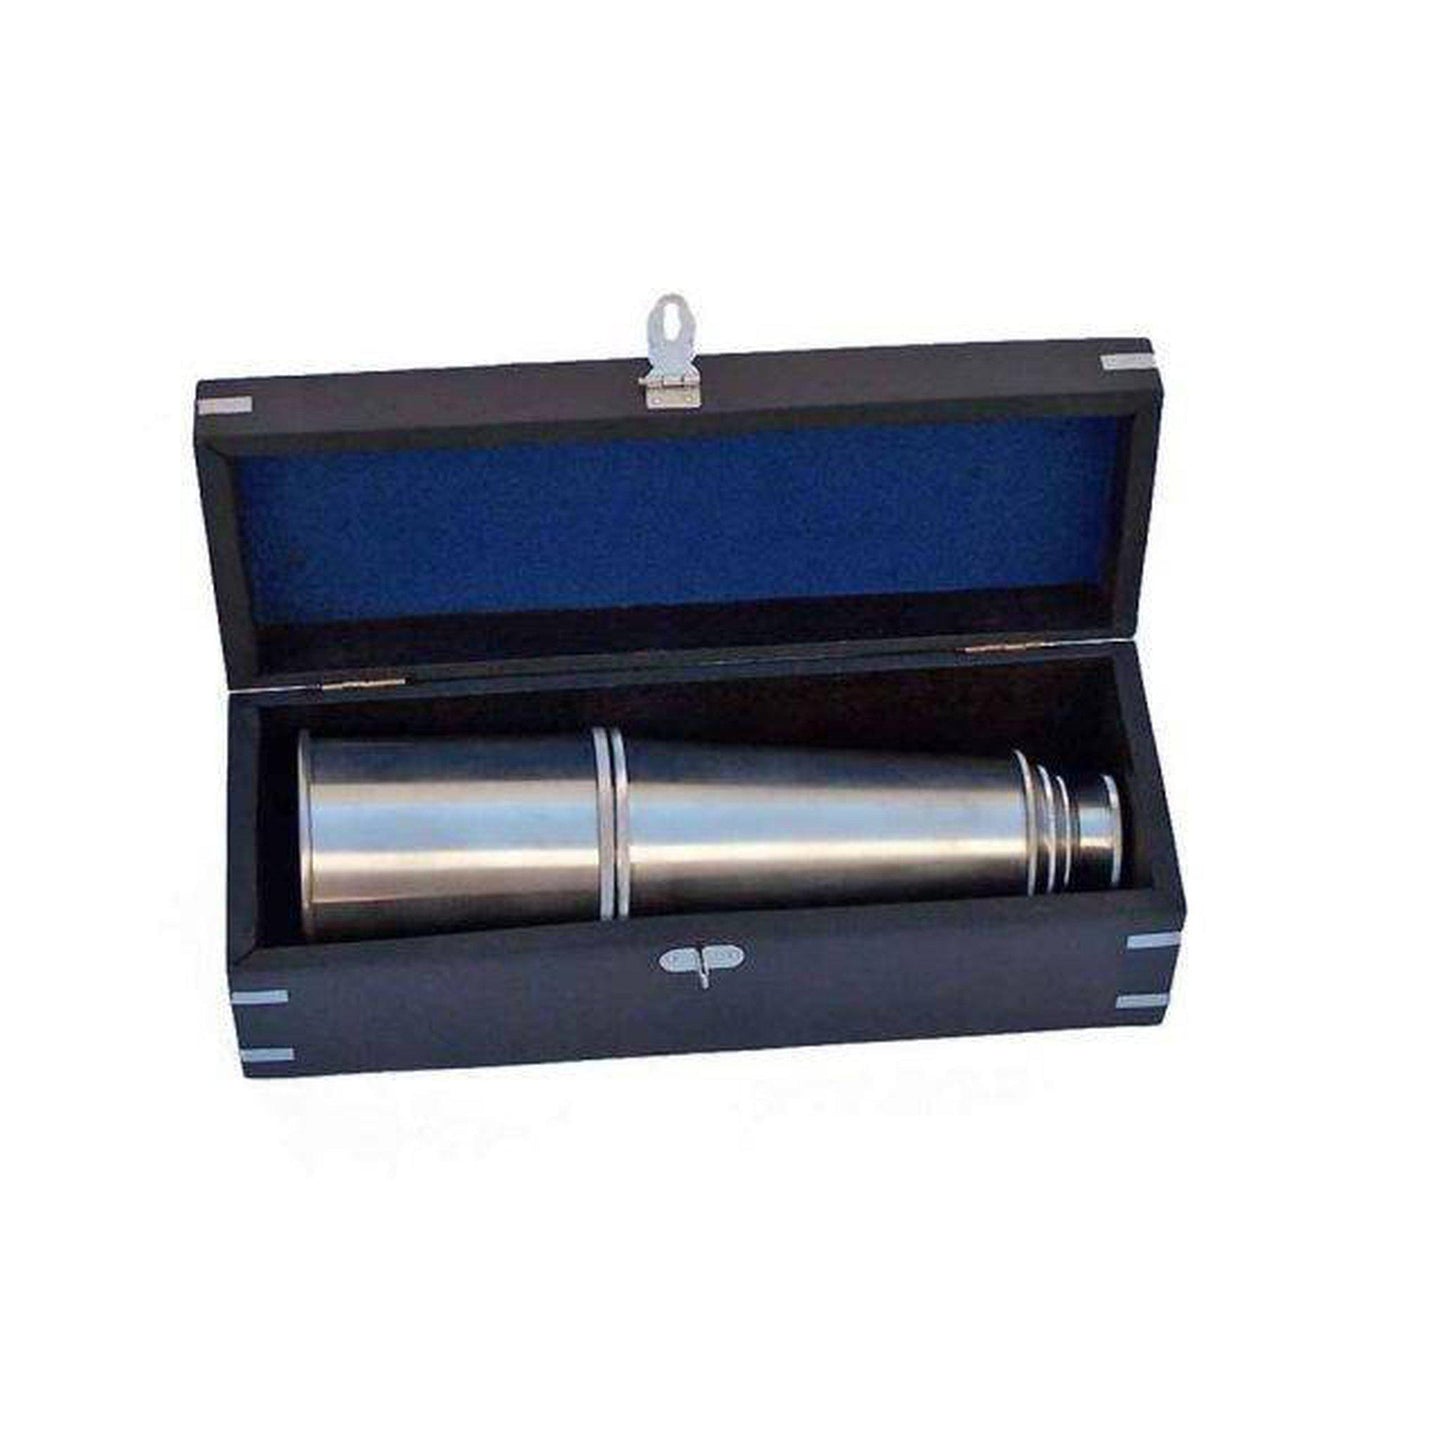 Handcrafted Model Ships Deluxe Class Brushed Nickel Admirals Spyglass Telescope 27 with Rosewood Box FT-0215-BN